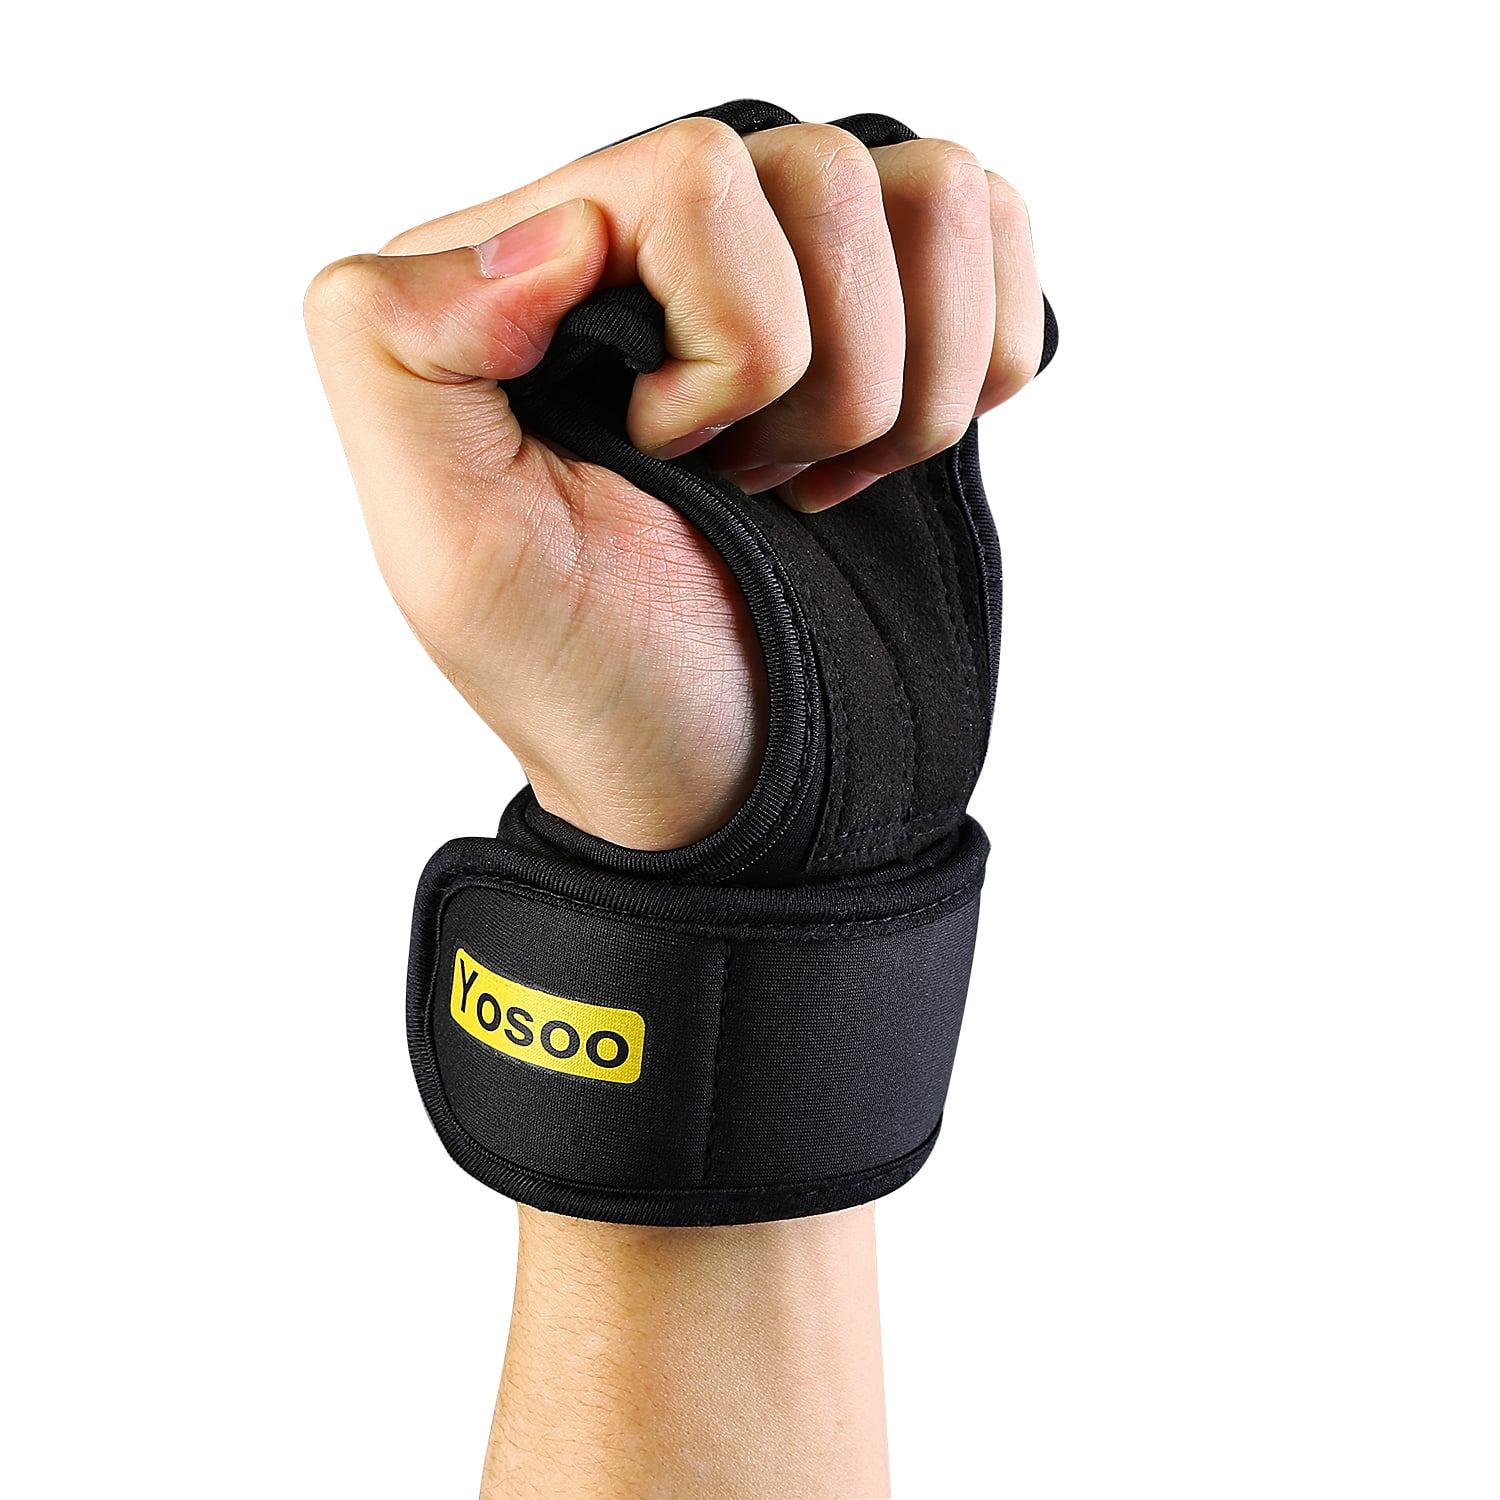 Where Middle Finger and Palm Meet. Measure the Right Hand From the Base of the Palm Where Palm Meets the Wrist Youth Sizes Gymnastics Hand Grips ! Soft Genuine Leather to the Base of the Middle Finger 